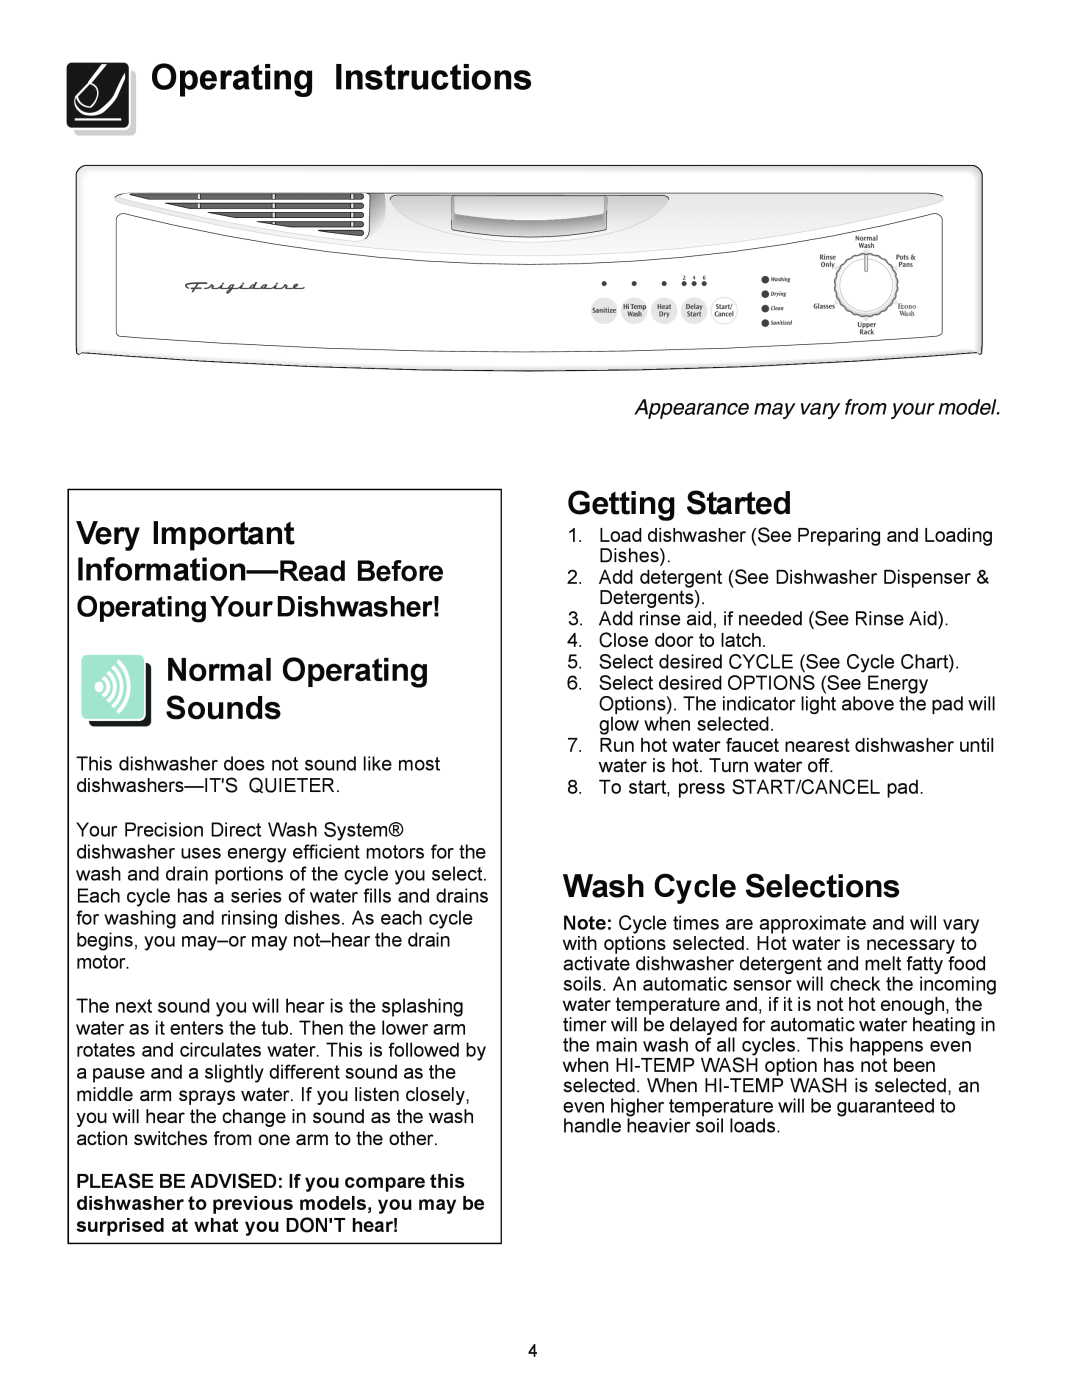 Frigidaire 1200 Operating Instructions, Very Important Information-Read Before, Normal Operating Sounds, Getting Started 